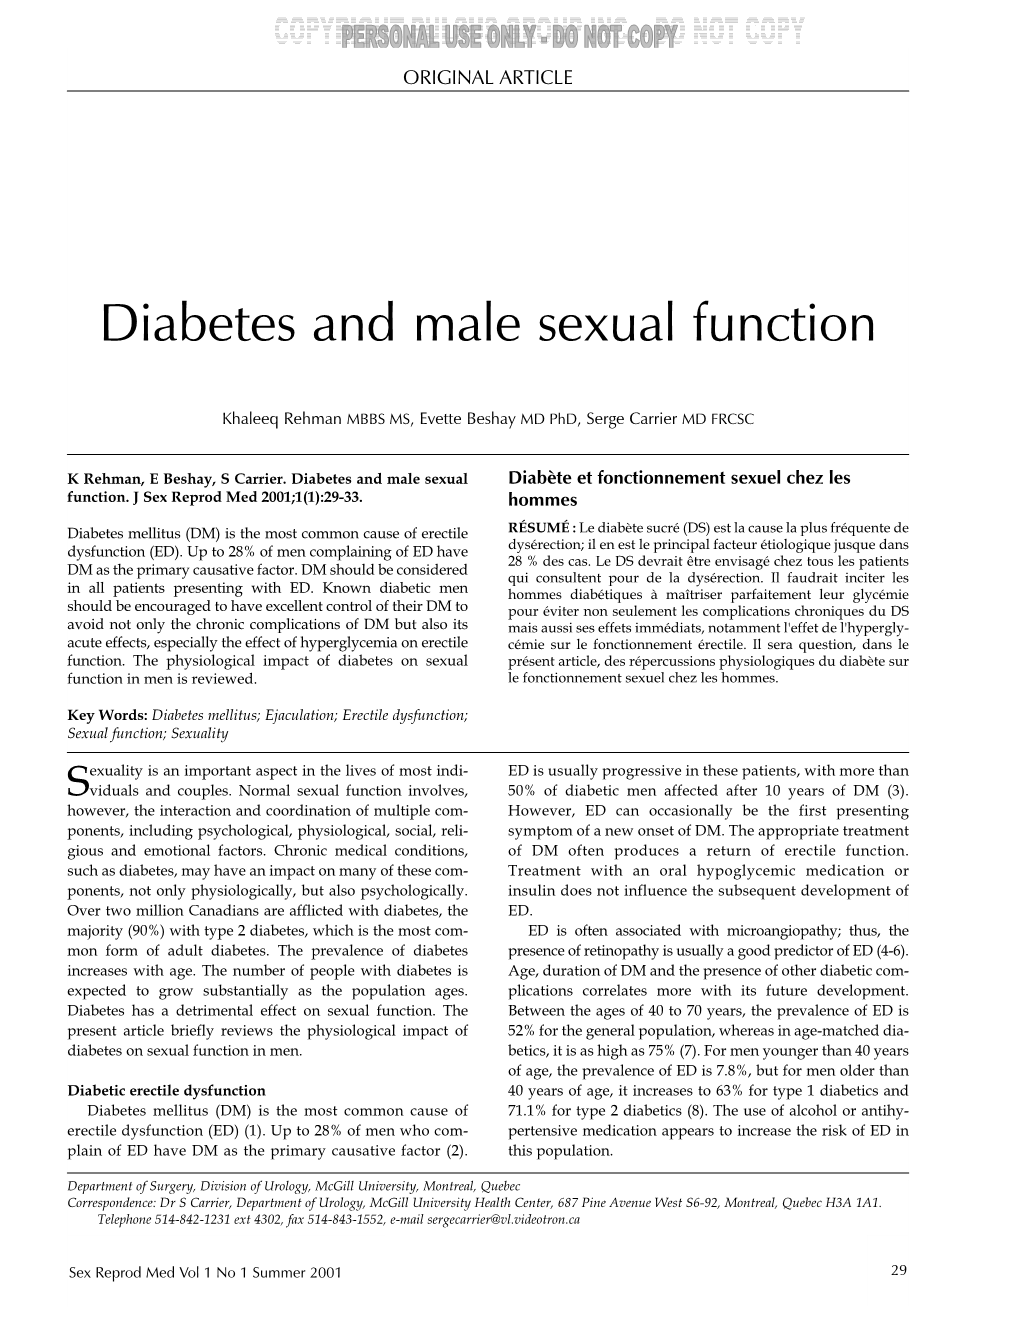 Diabetes and Male Sexual Function